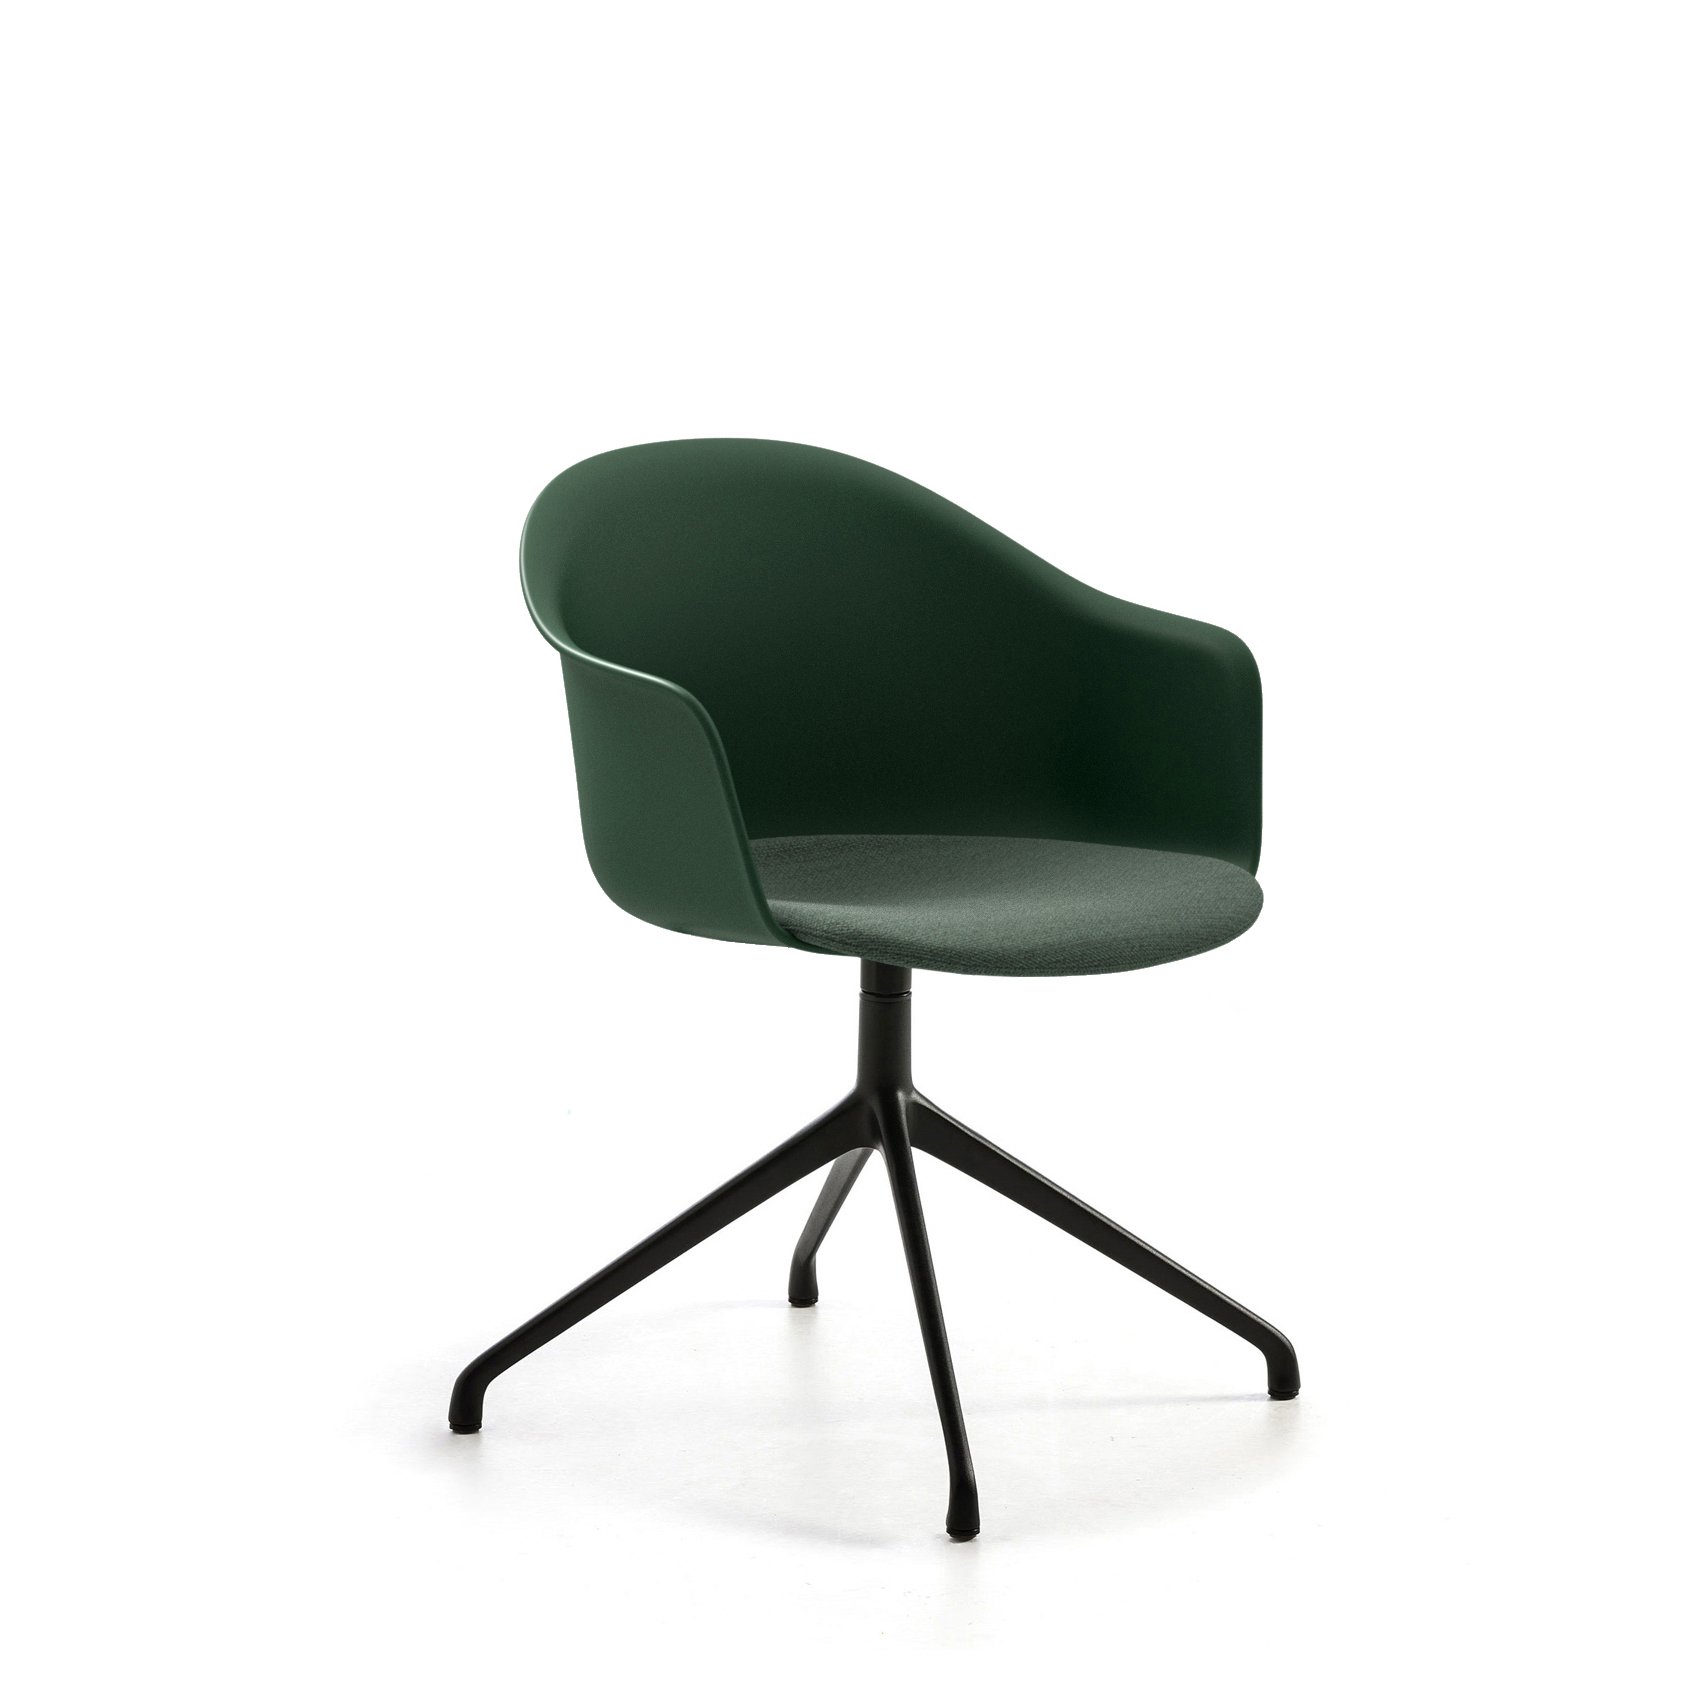 Mani Armshell SP Swivel Armchair office from Arrmet, designed by Welling/Ludvik